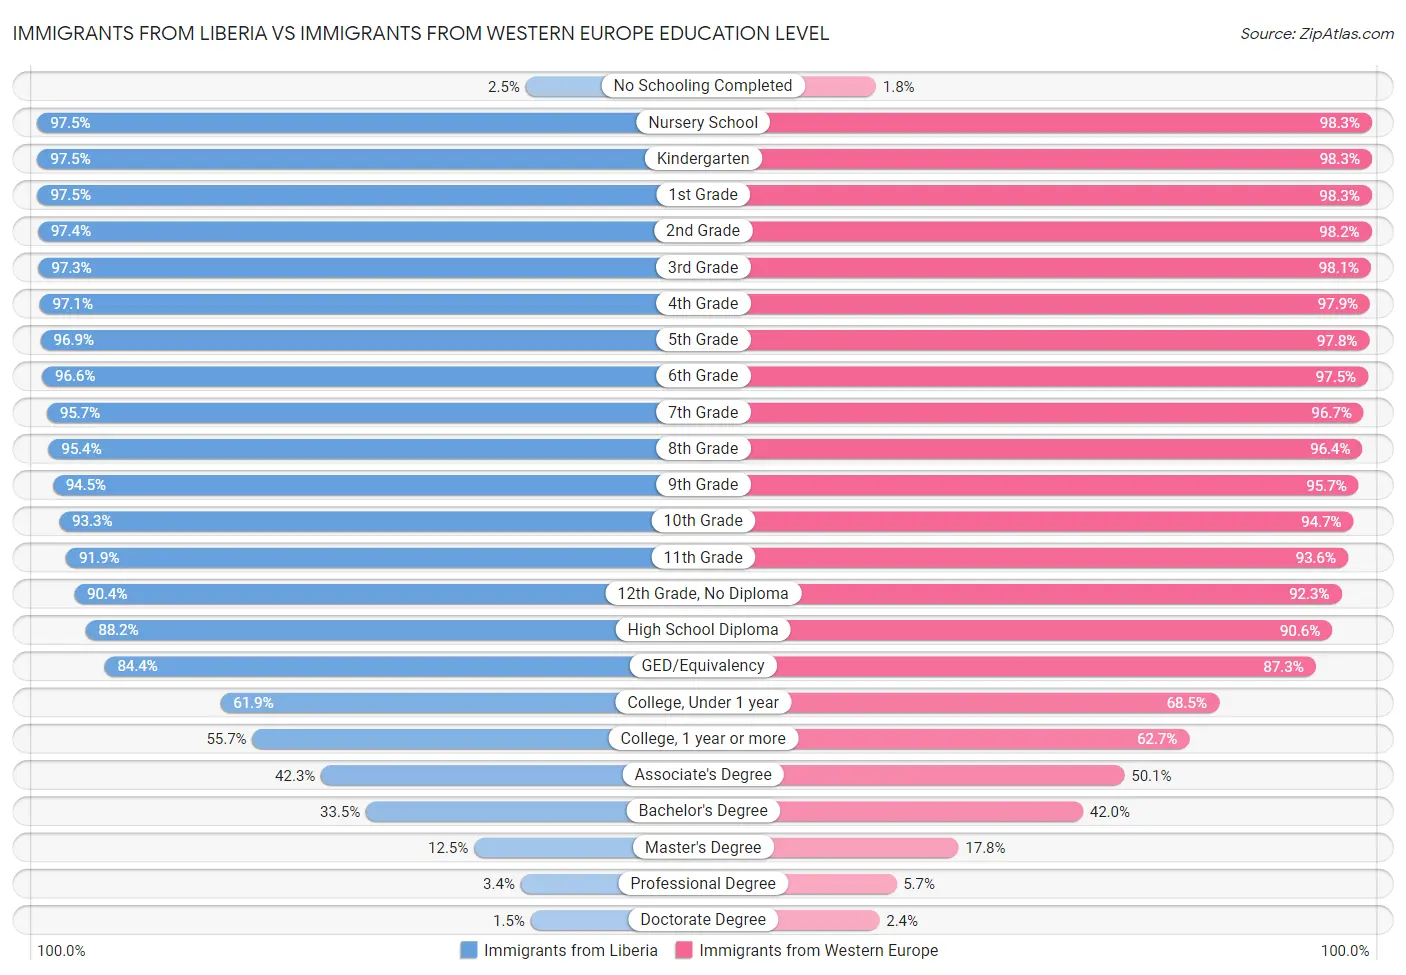 Immigrants from Liberia vs Immigrants from Western Europe Education Level